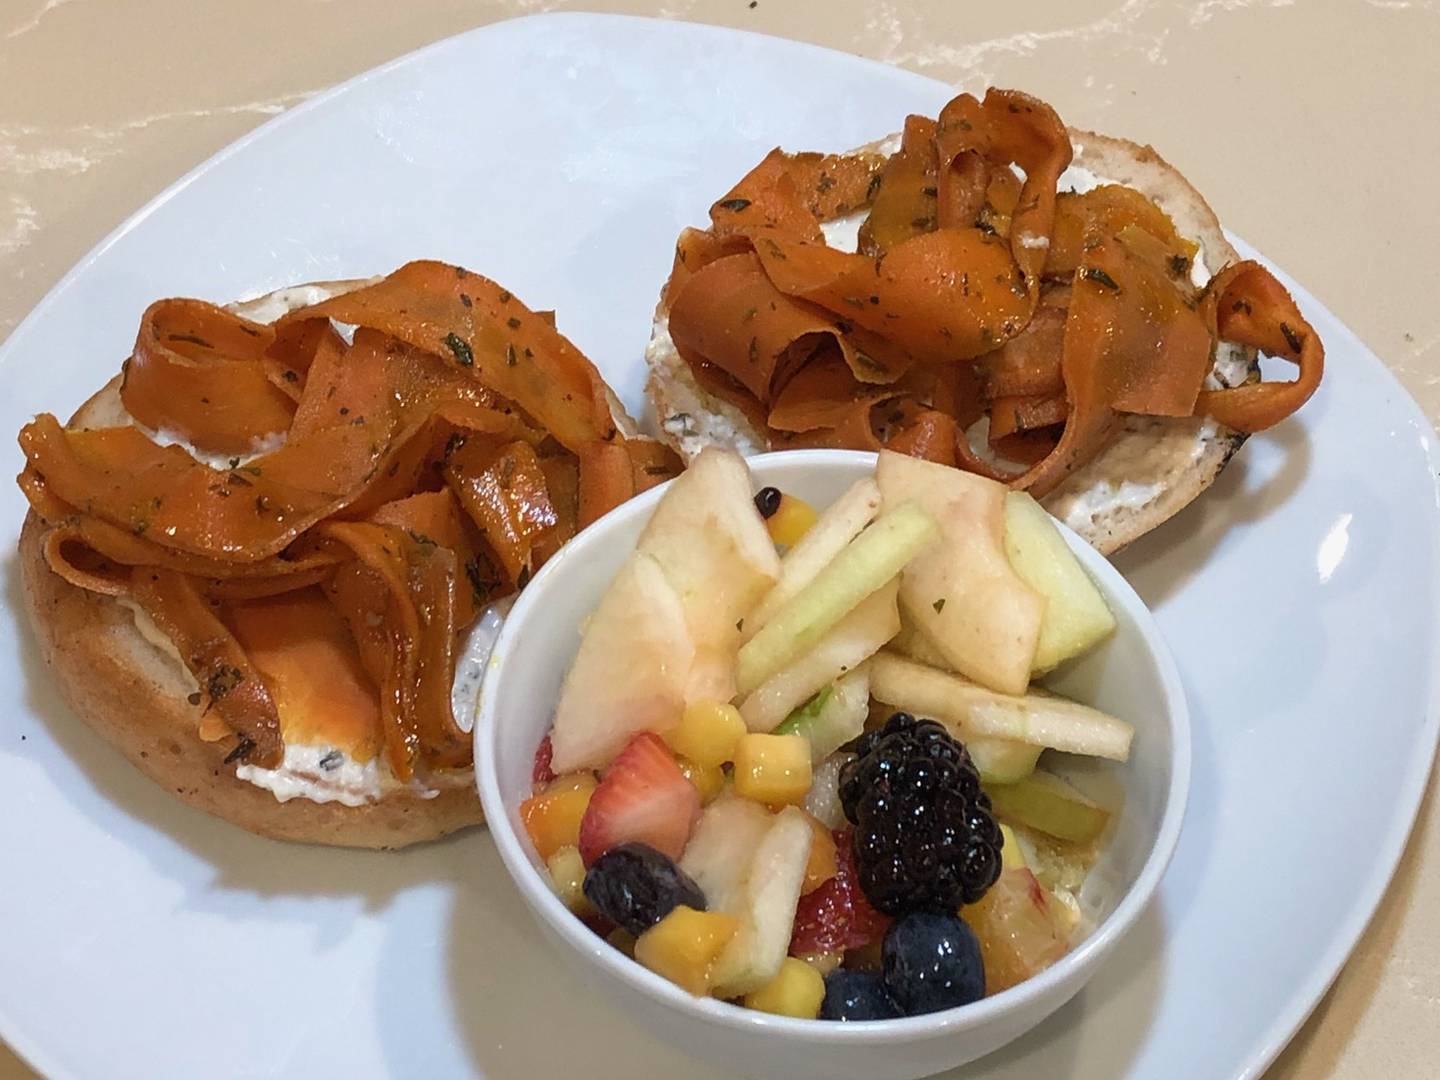 The bagels and lox at UpRising in Lake in the Hills came with a side of fresh fruit and vegan garlic herb cream cheese beneath the sweet pickled carrots, and made for a filling, healthy entree.